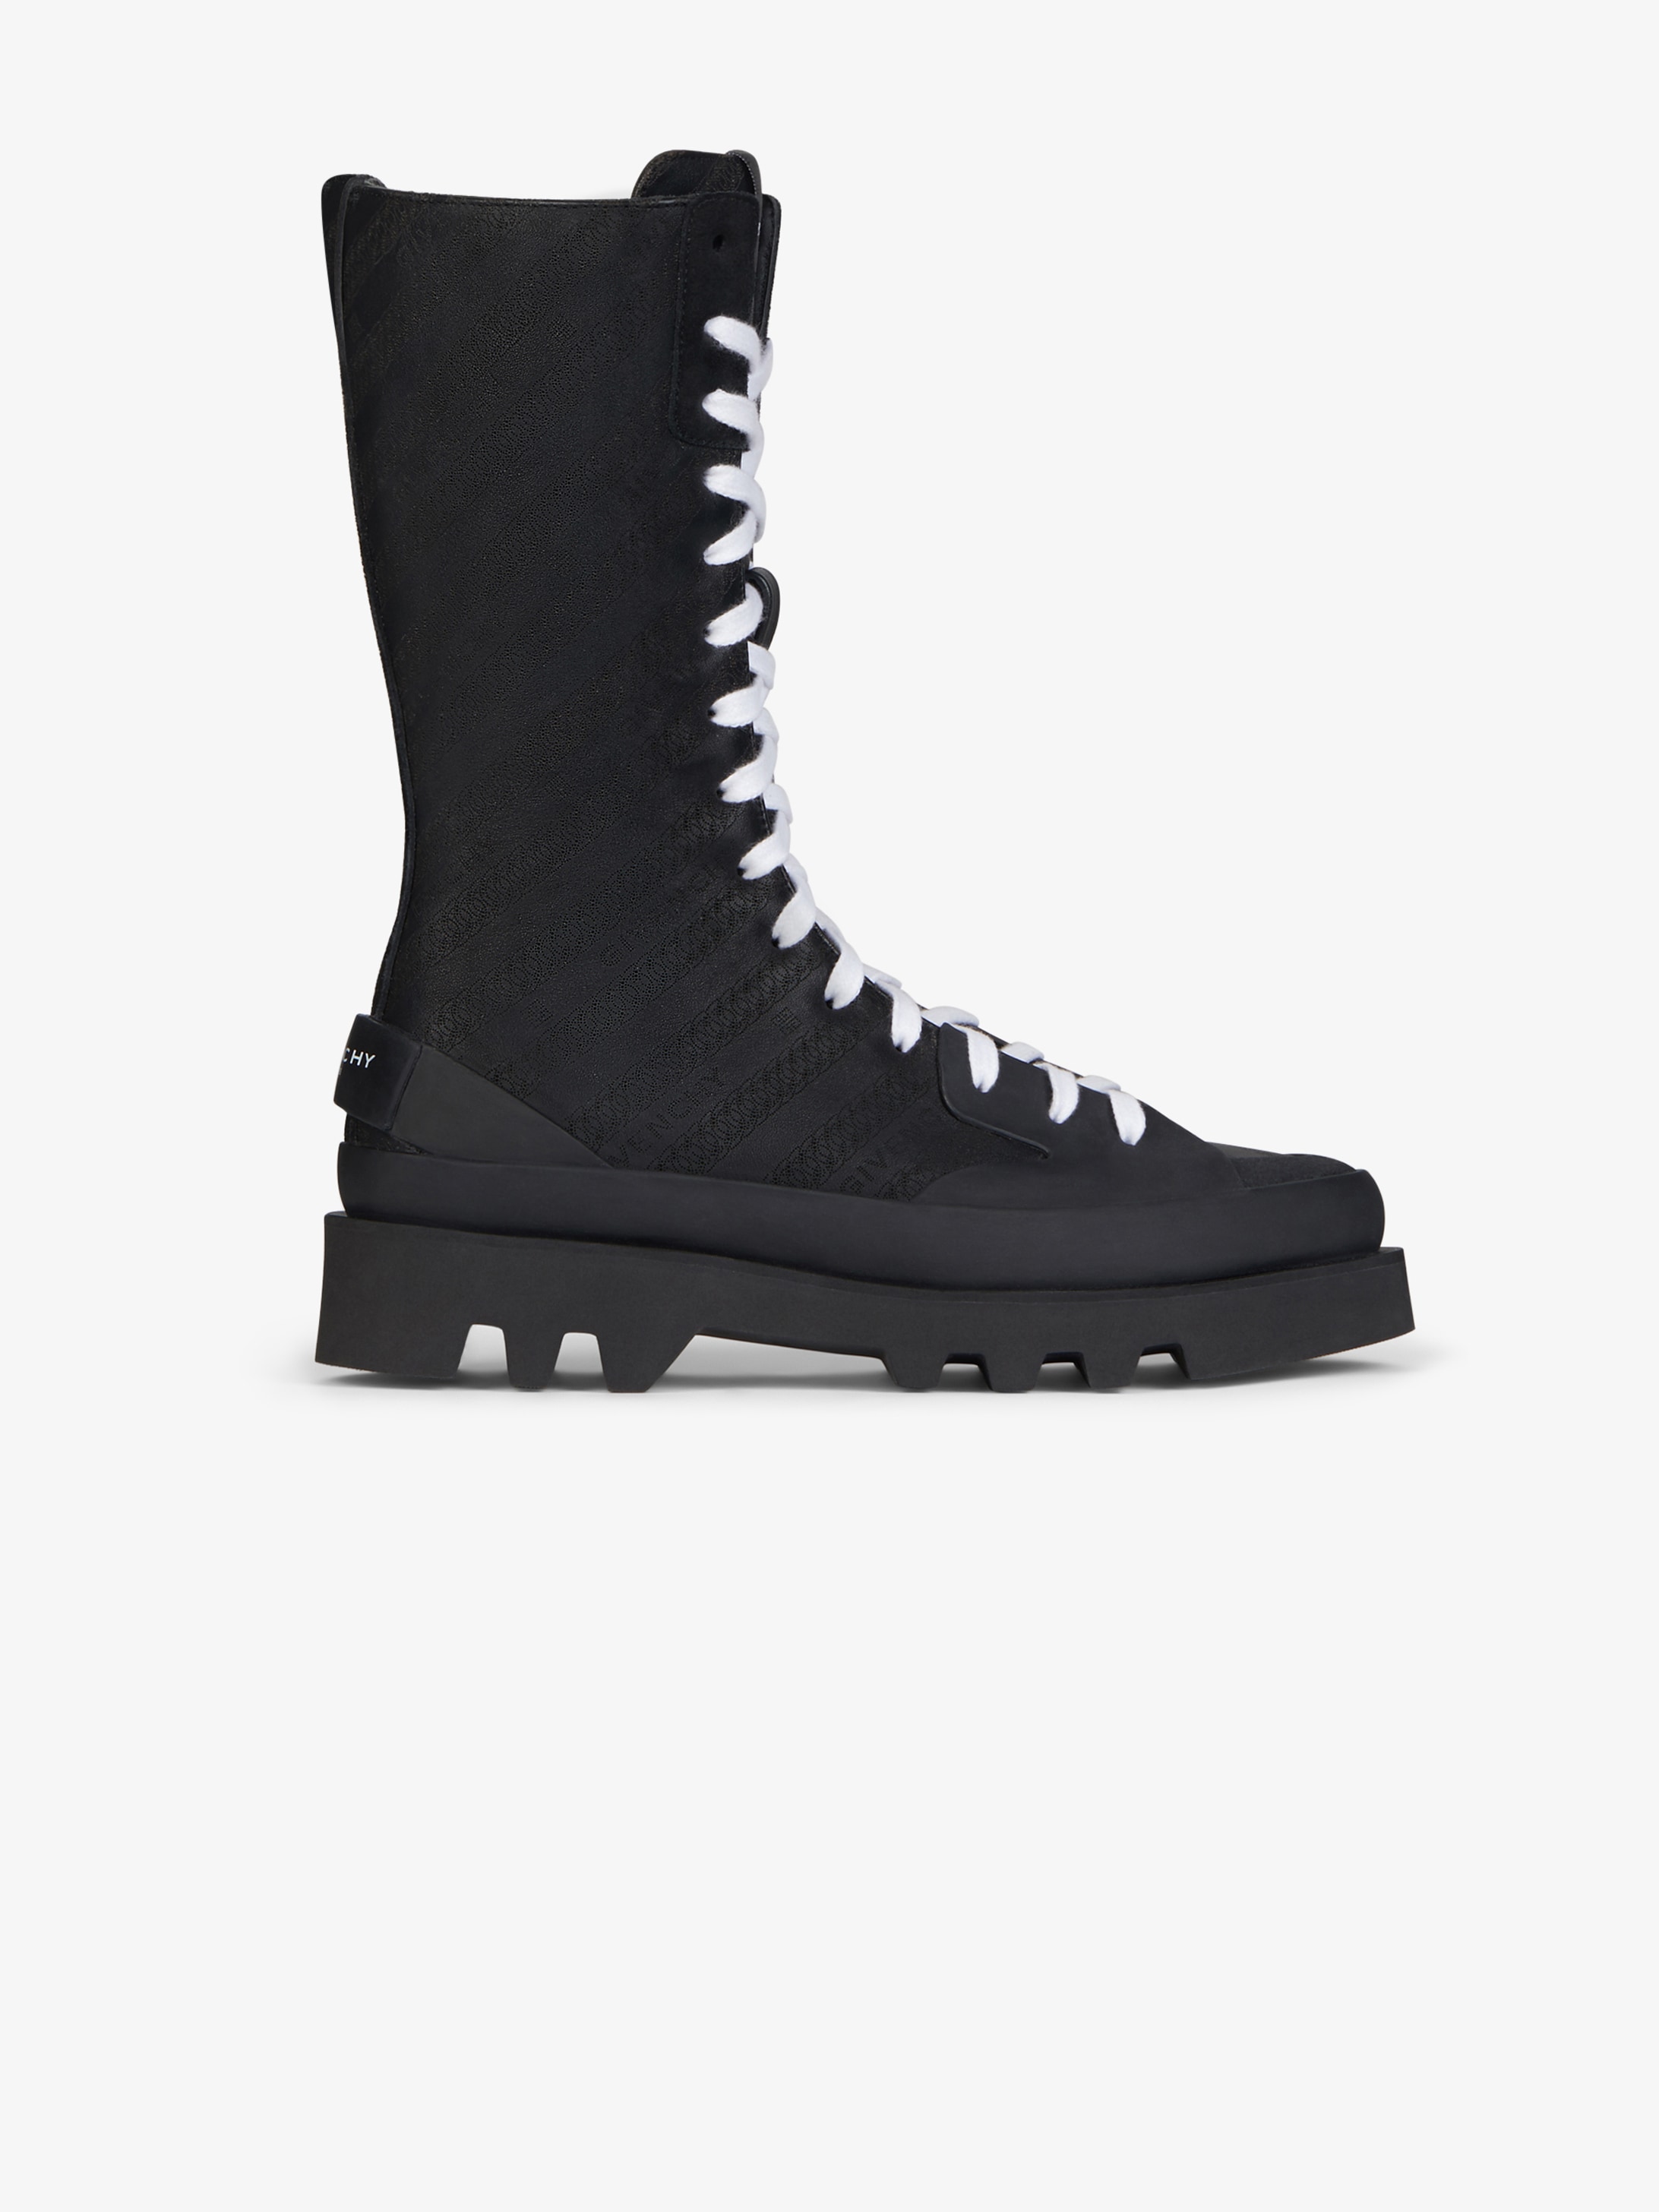 givenchy zipper boots